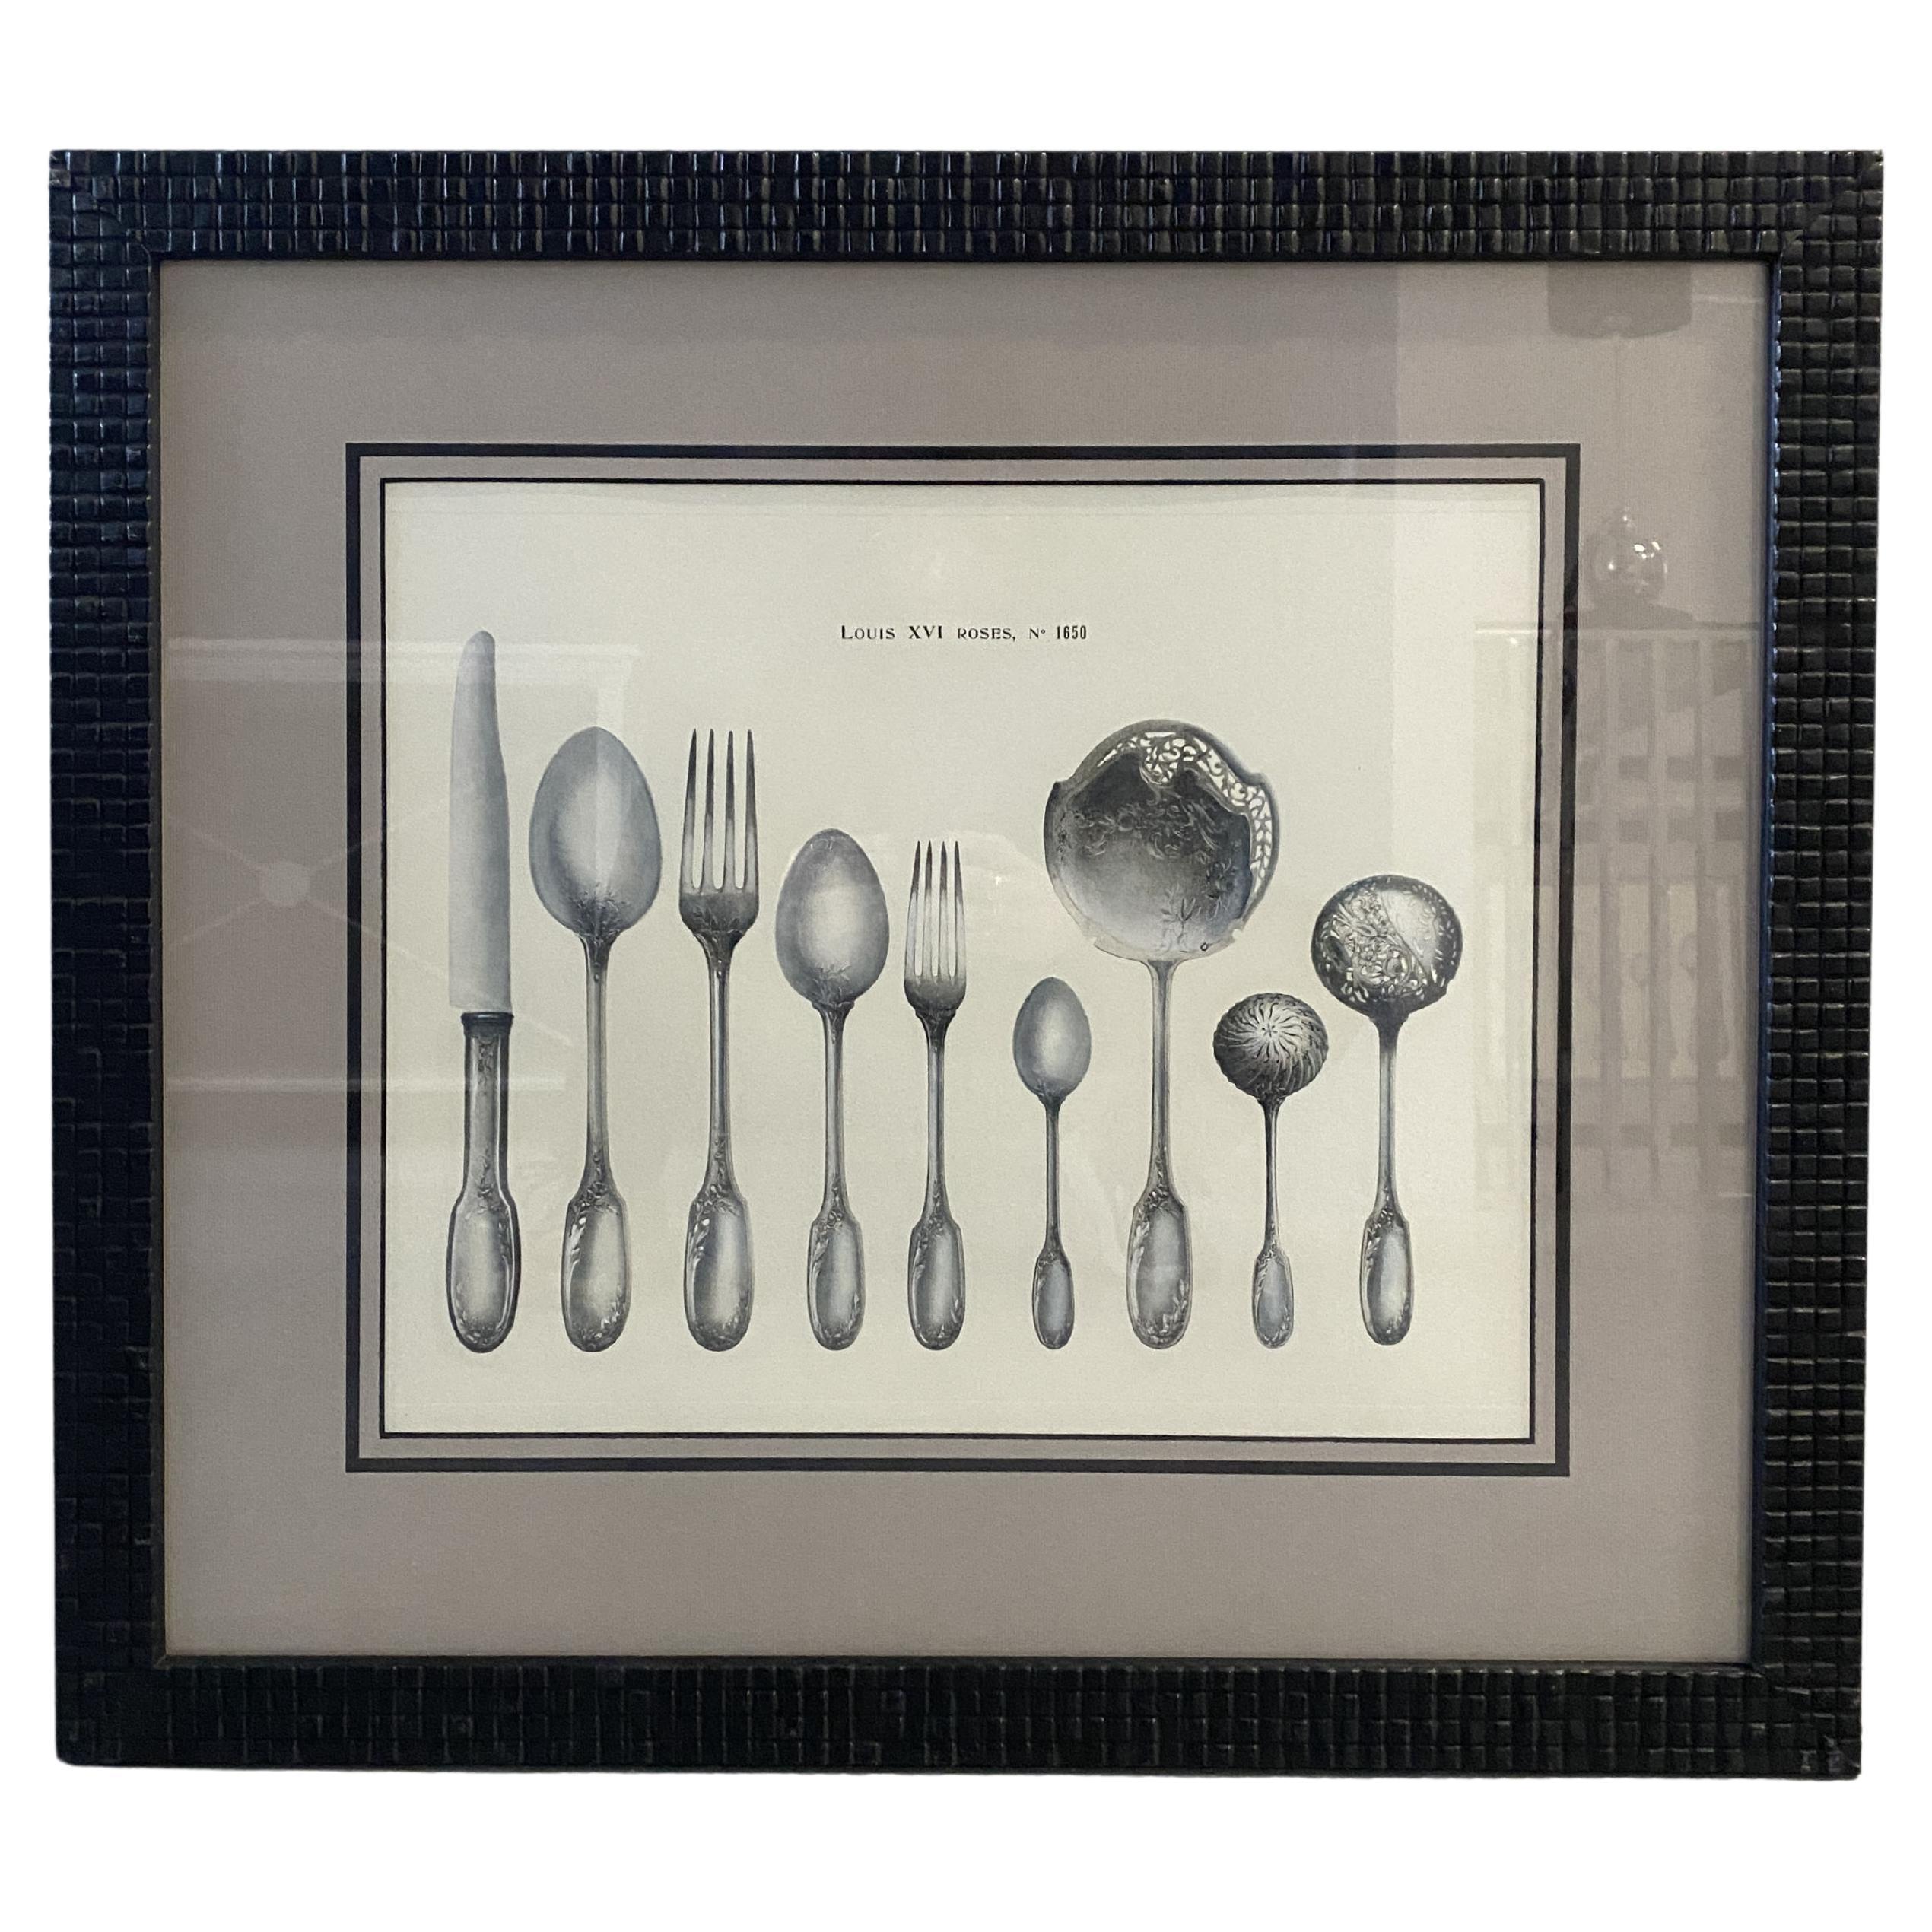 Italian Contemporary Cutlery Service" Black Print with Black Wood Frame 2 of 2